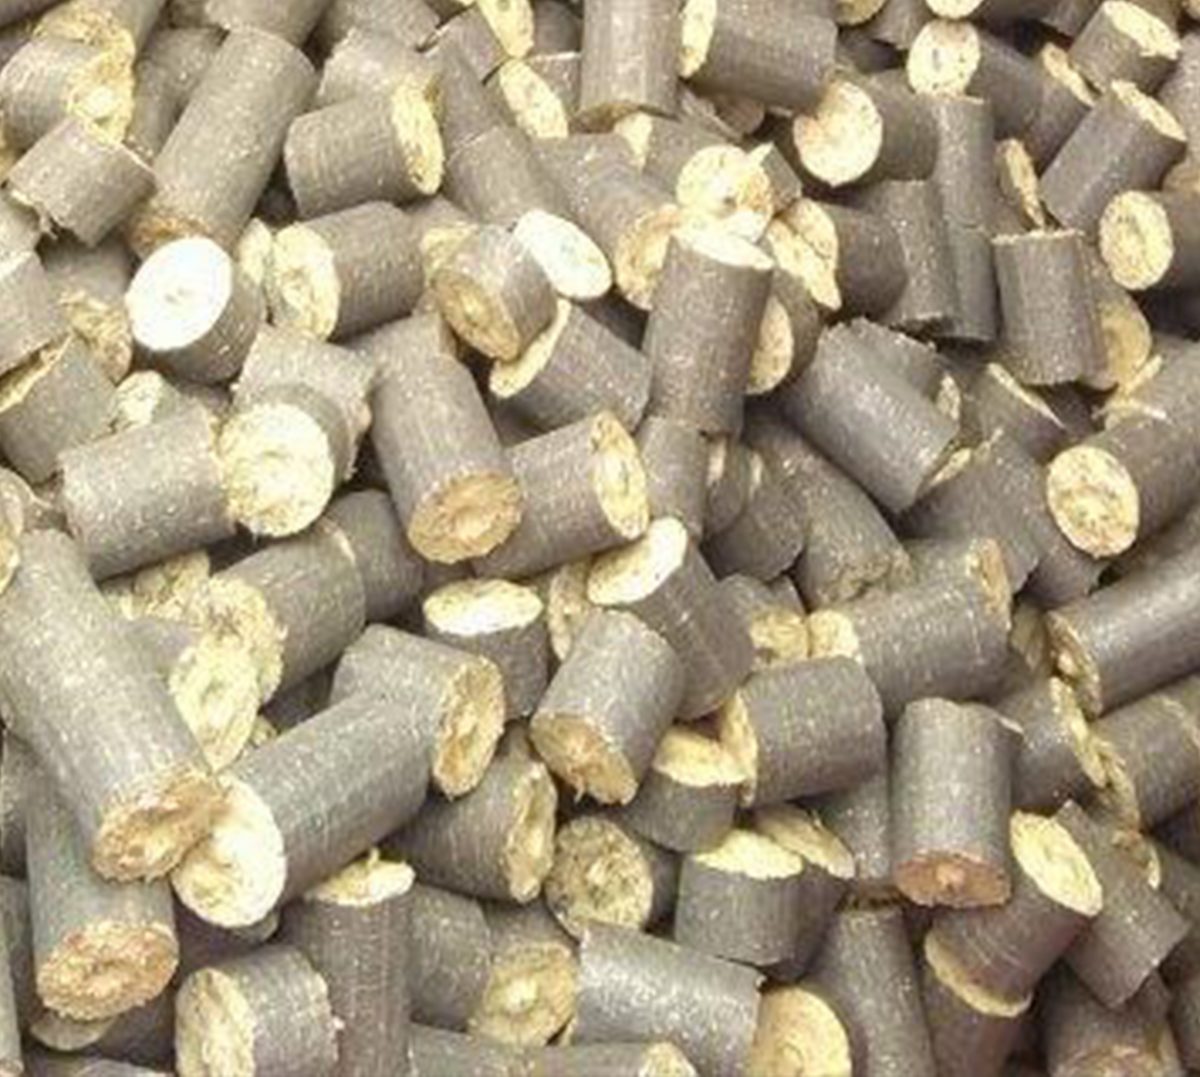 Briquettes from insulation panels